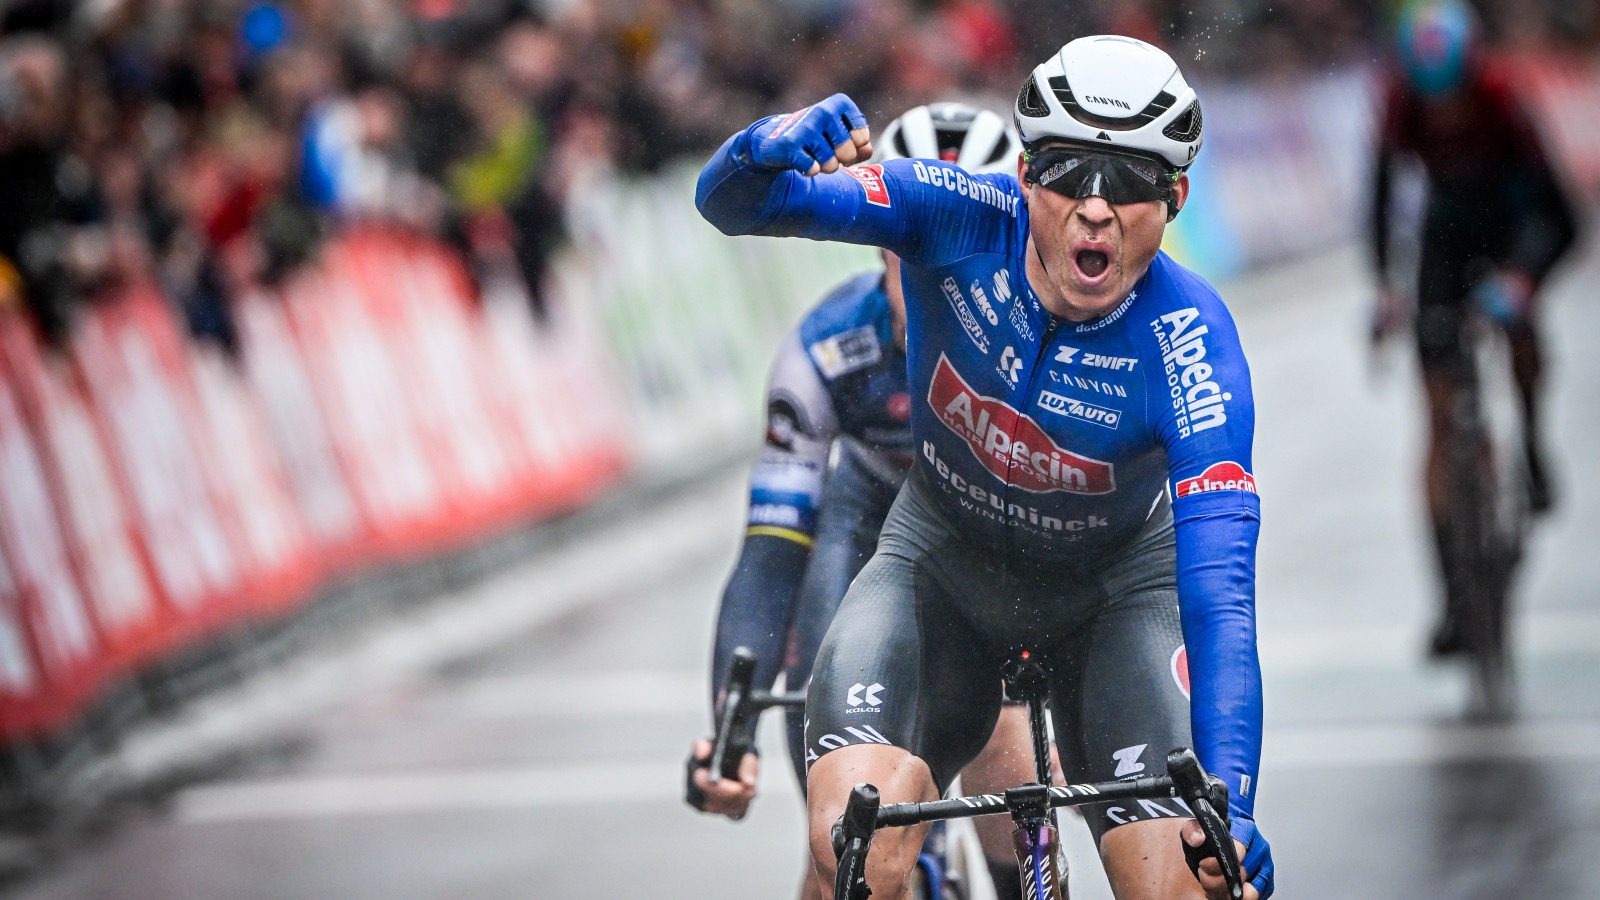 Belgian Jasper Philipsen of Alpecin-Deceuninck celebrates as he crosses the finish line to win the men's elite race of the 'Classic Brugge-De Panne' one-day cycling race, 207,4km from Brugge to De Panne, Wednesday 22 March 2023. BELGA PHOTO ERIC LALMAND